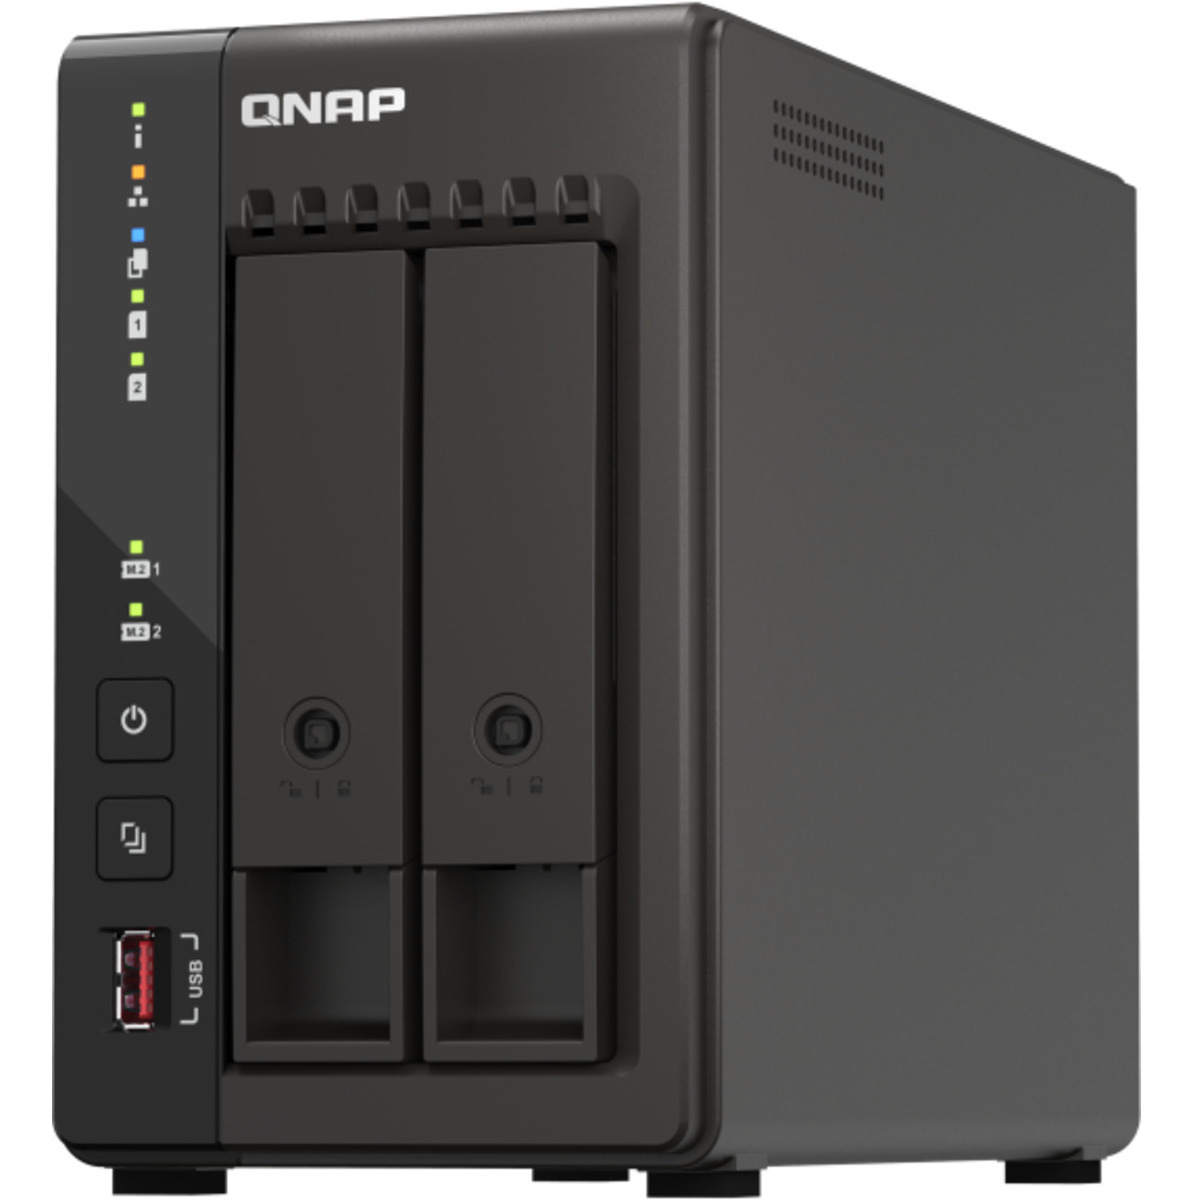 buy $1180 QNAP TS-253E 16tb Desktop NAS - Network Attached Storage Device 2x8000gb Western Digital Gold WD8004FRYZ 3.5 7200rpm SATA 6Gb/s HDD ENTERPRISE Class Drives Installed - Burn-In Tested - nas headquarters buy network attached storage server device das new raid-5 free shipping simply usa TS-253E